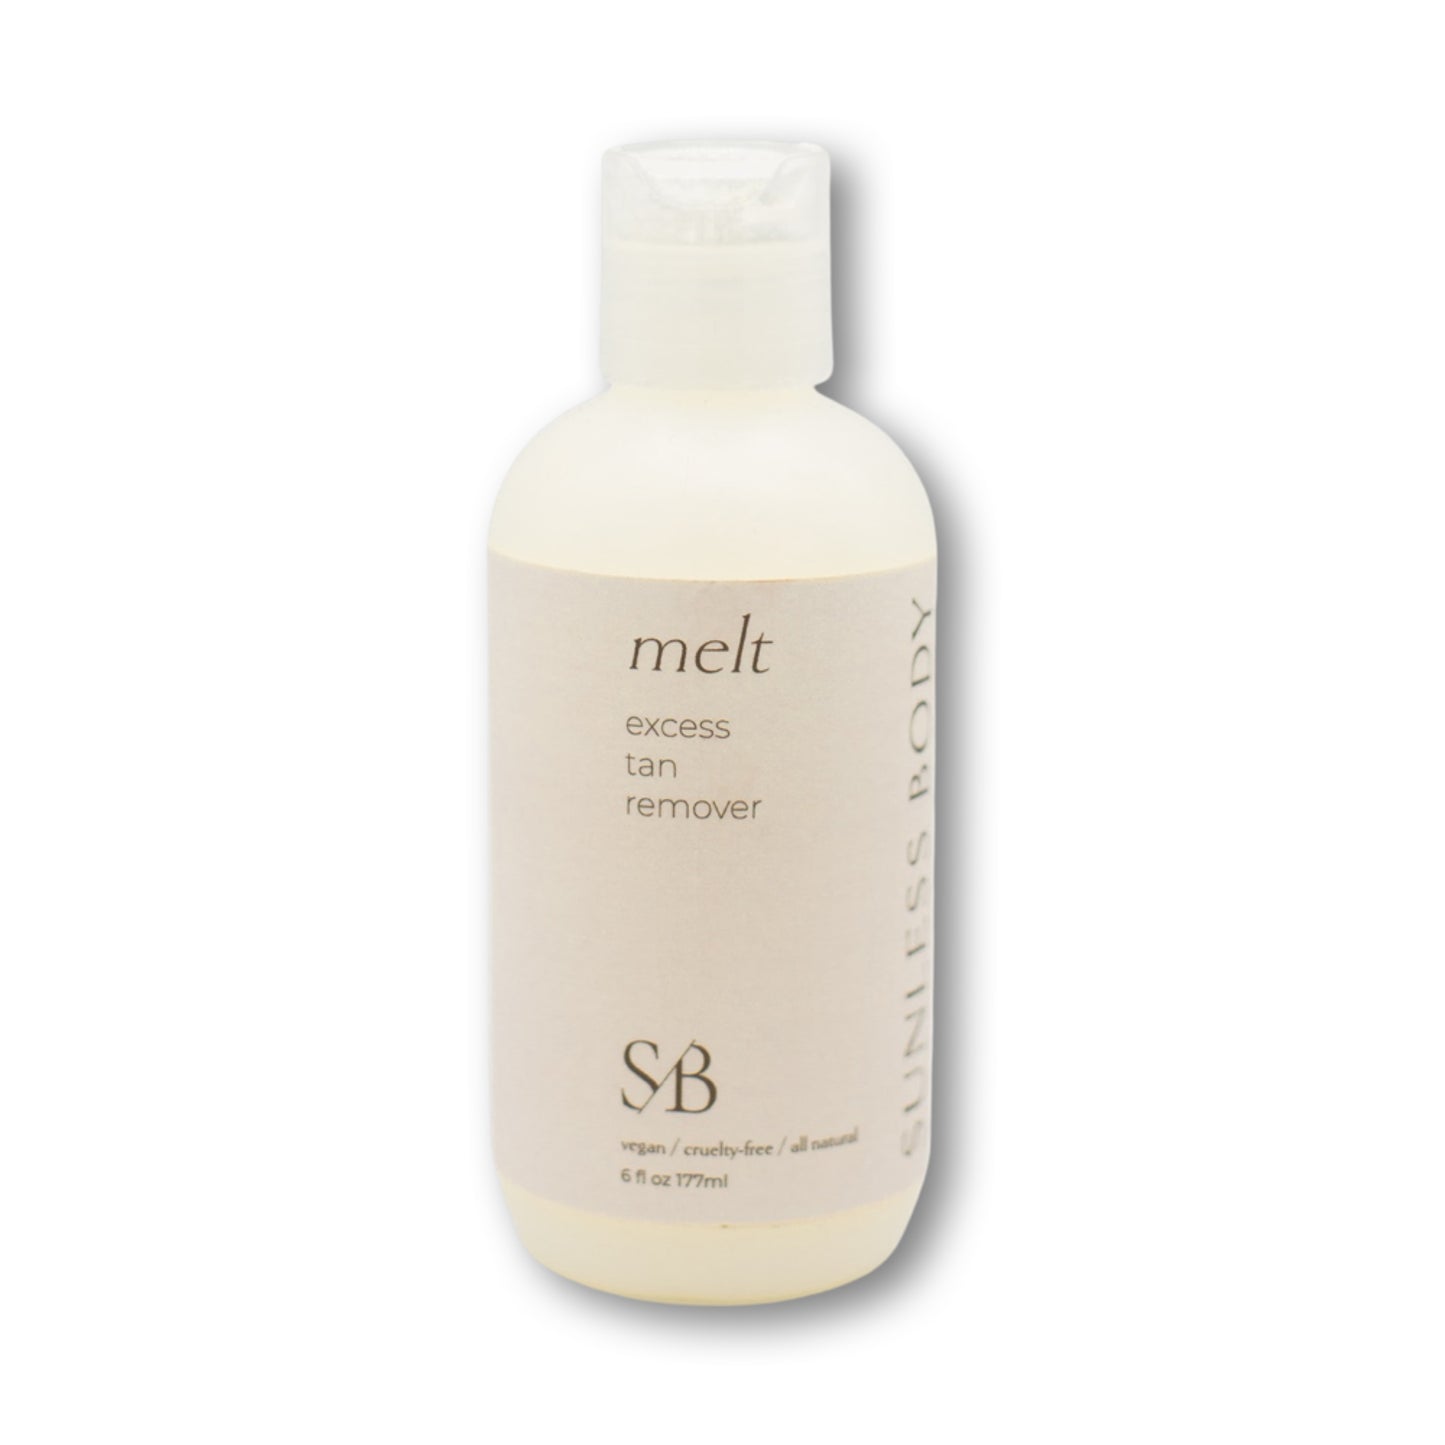 Melt Excess Tan Remover